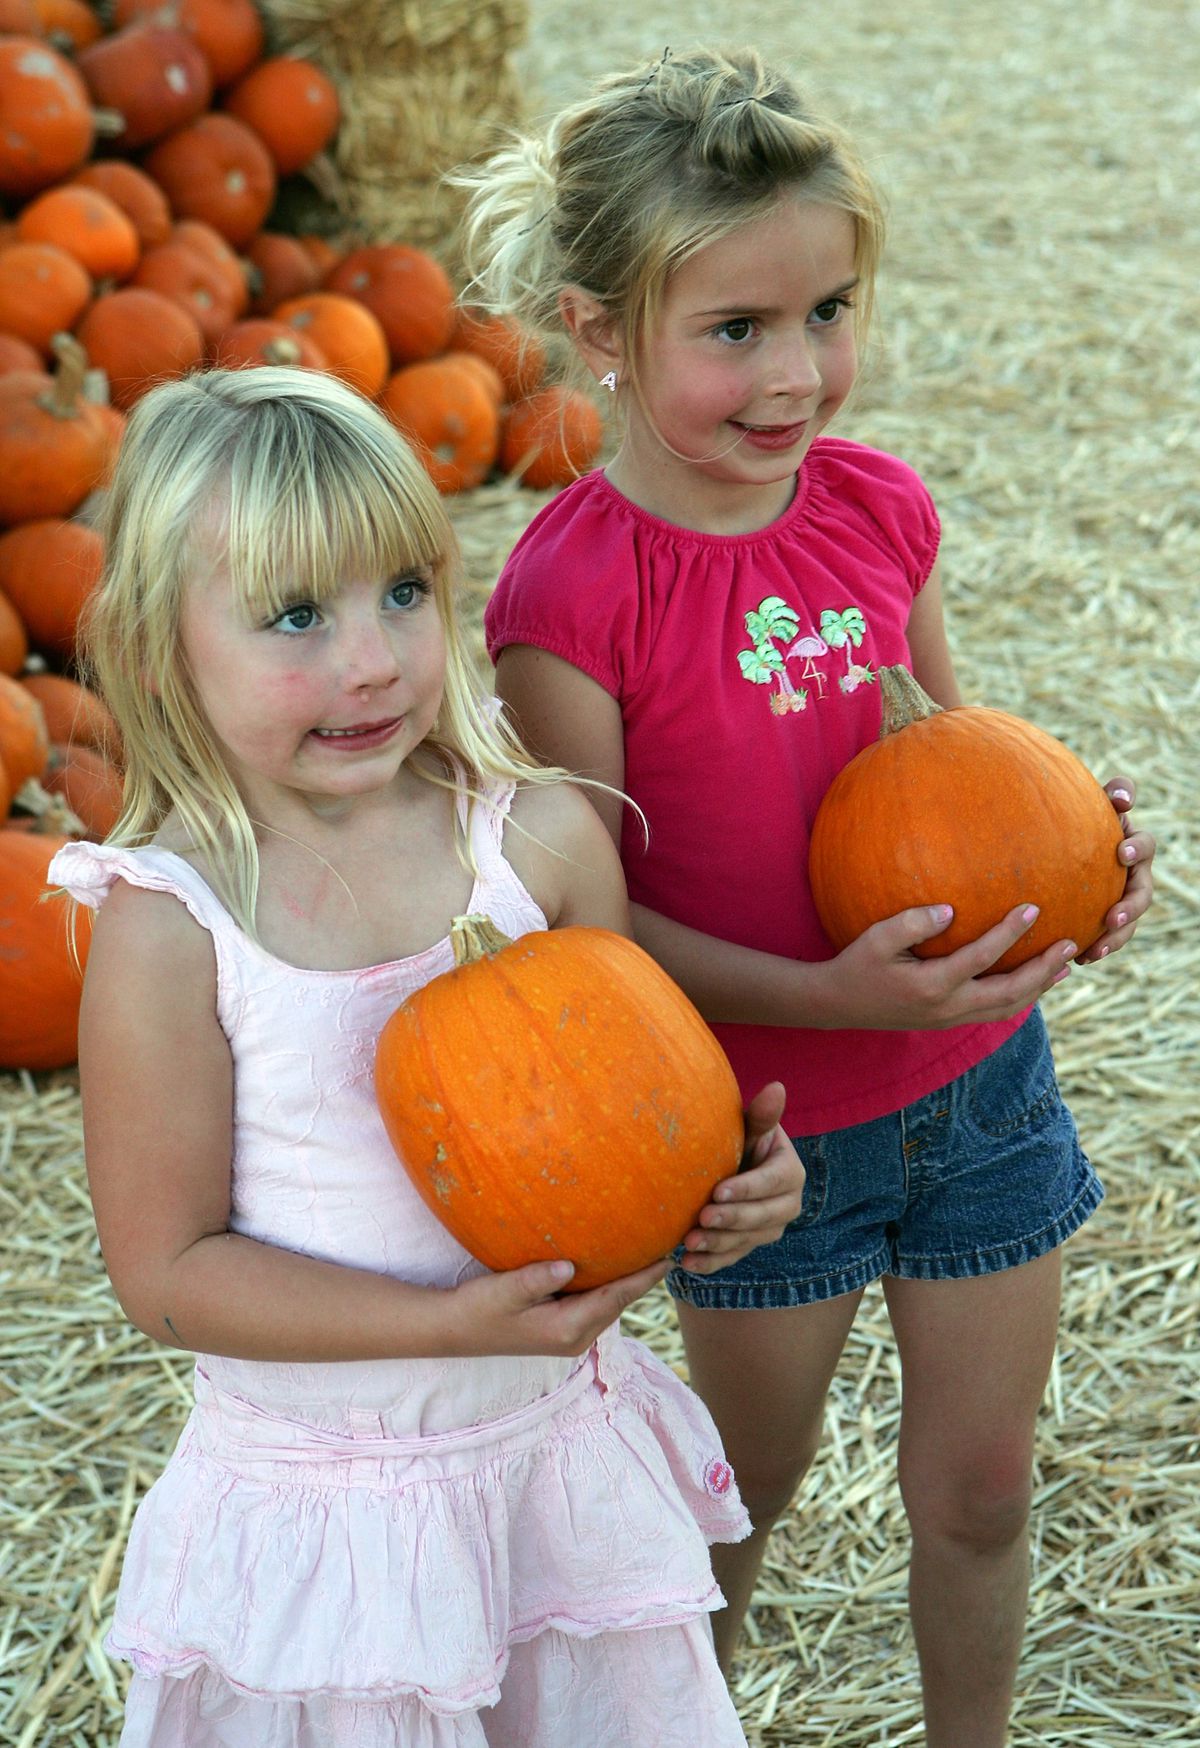 Pumpkin Patch Attracts Fall Revelers